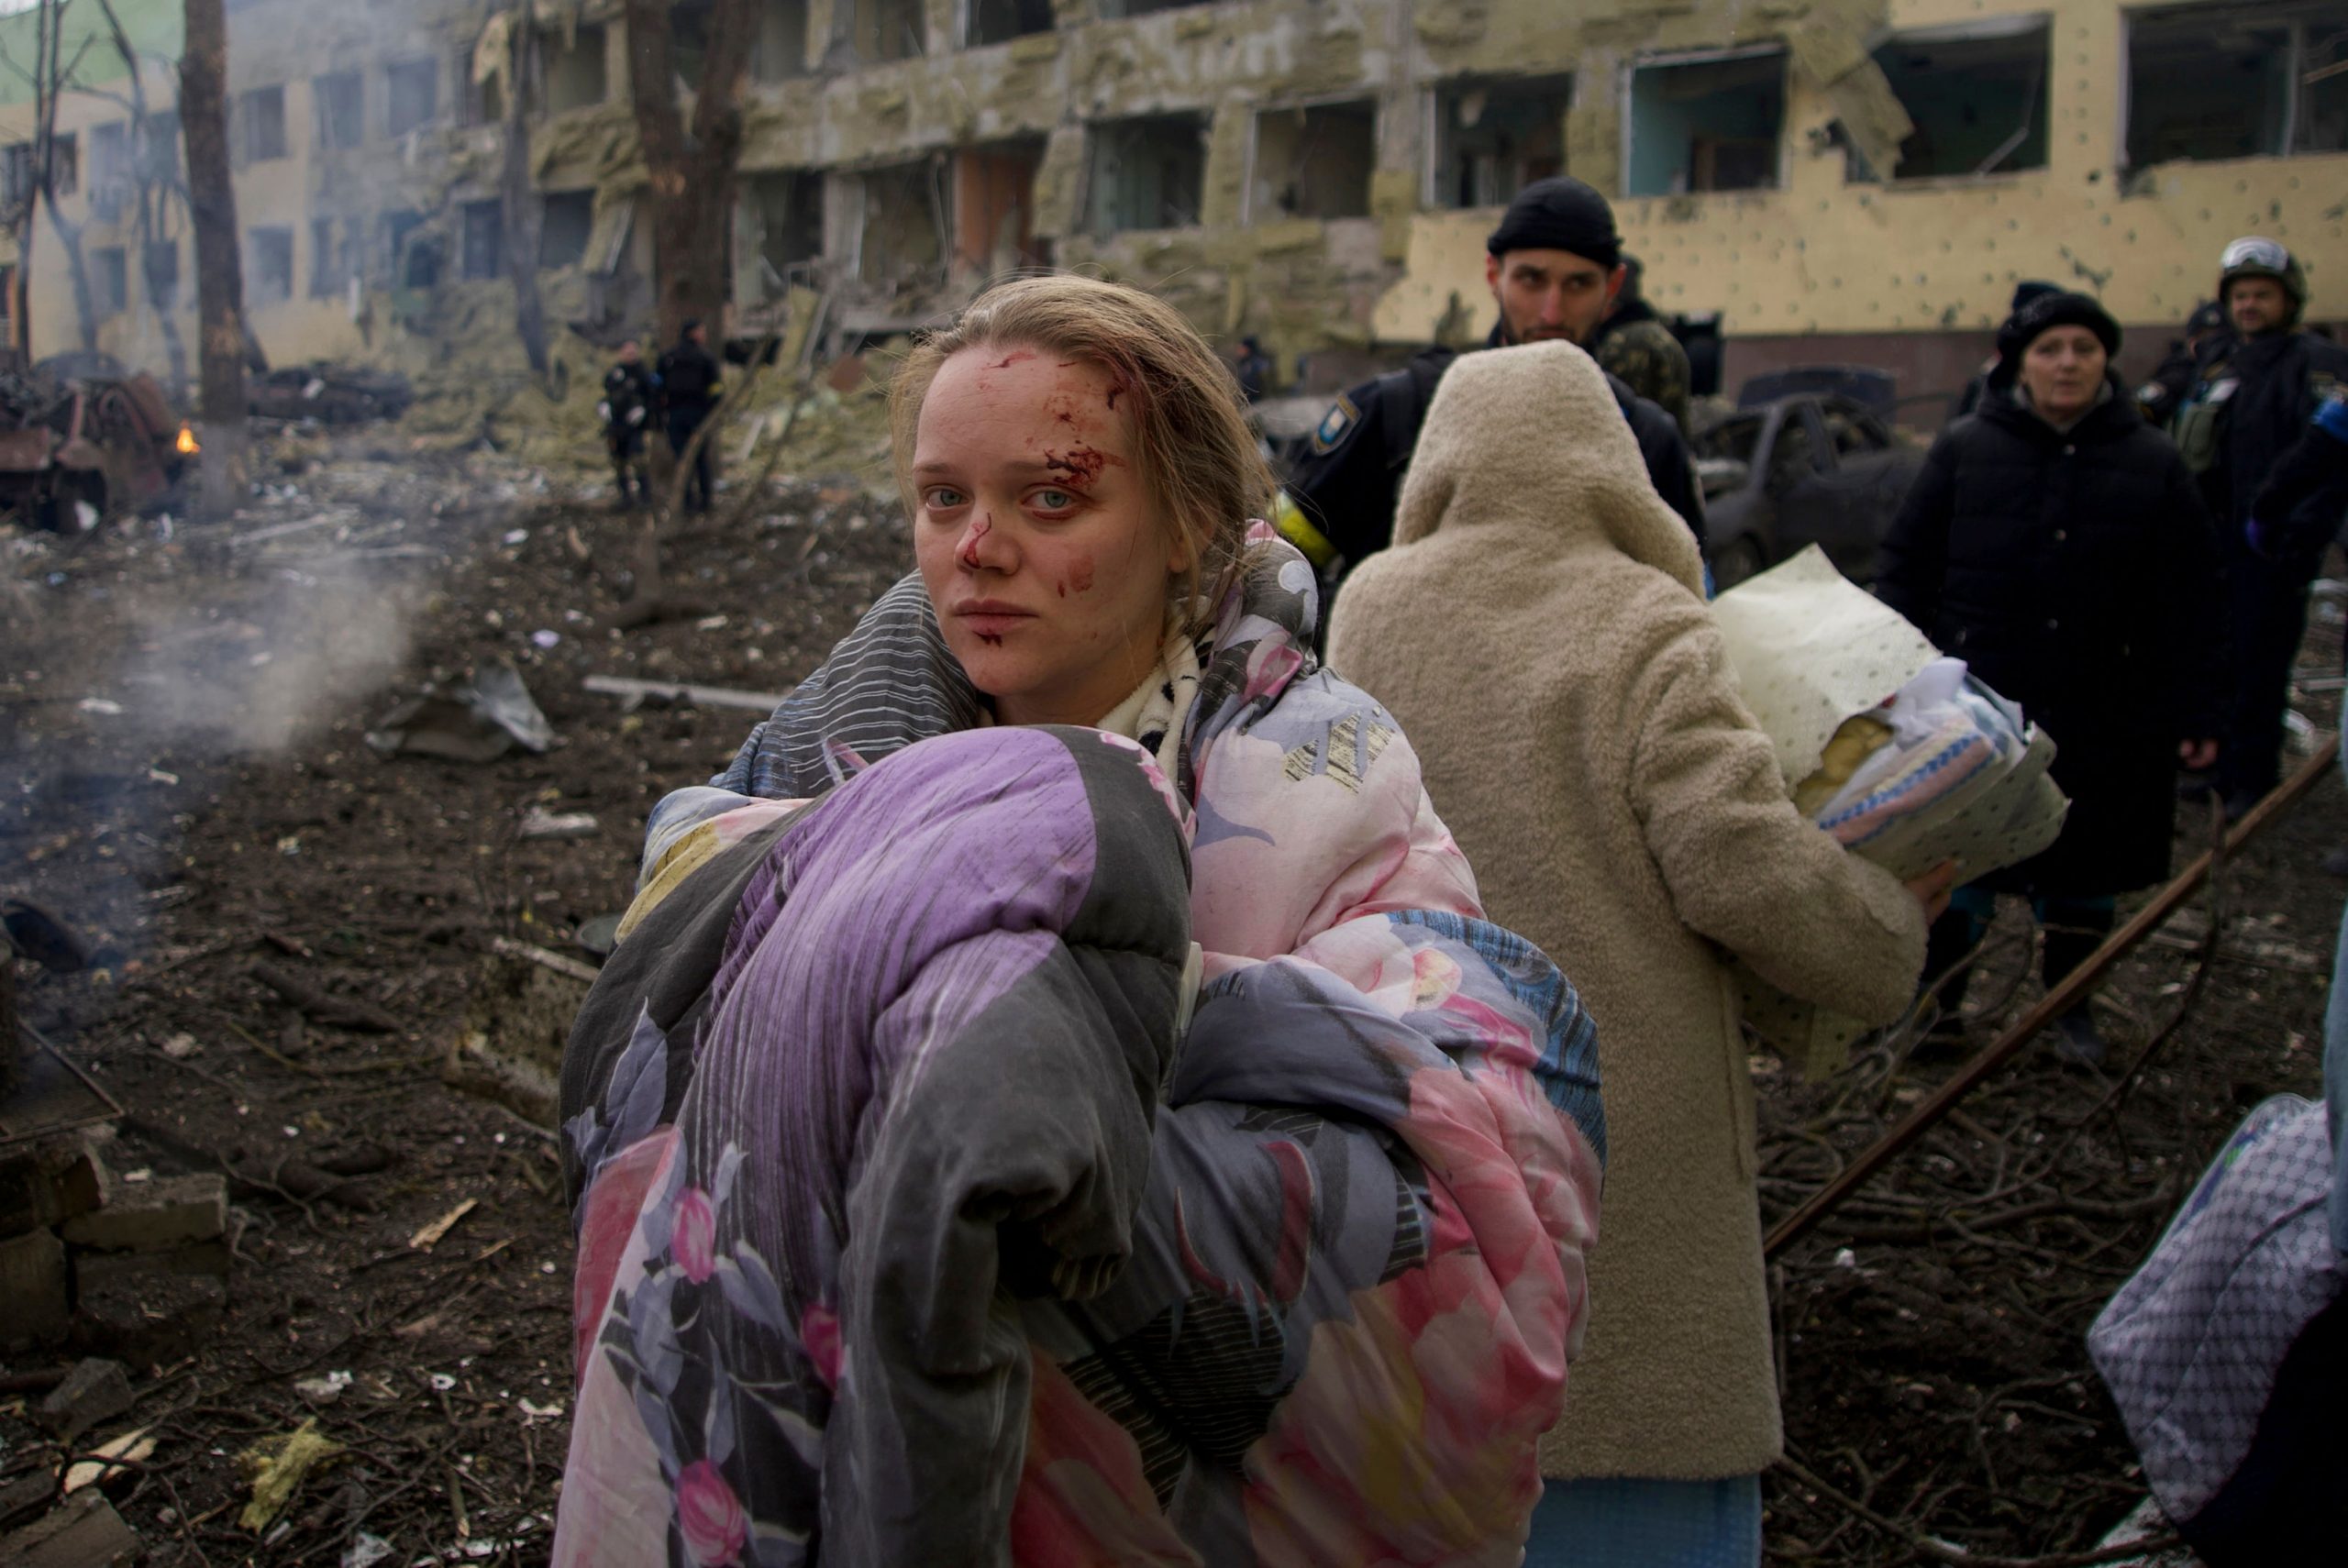 About 350,000 people trapped in Ukraine’s Mariupol, under Russian siege